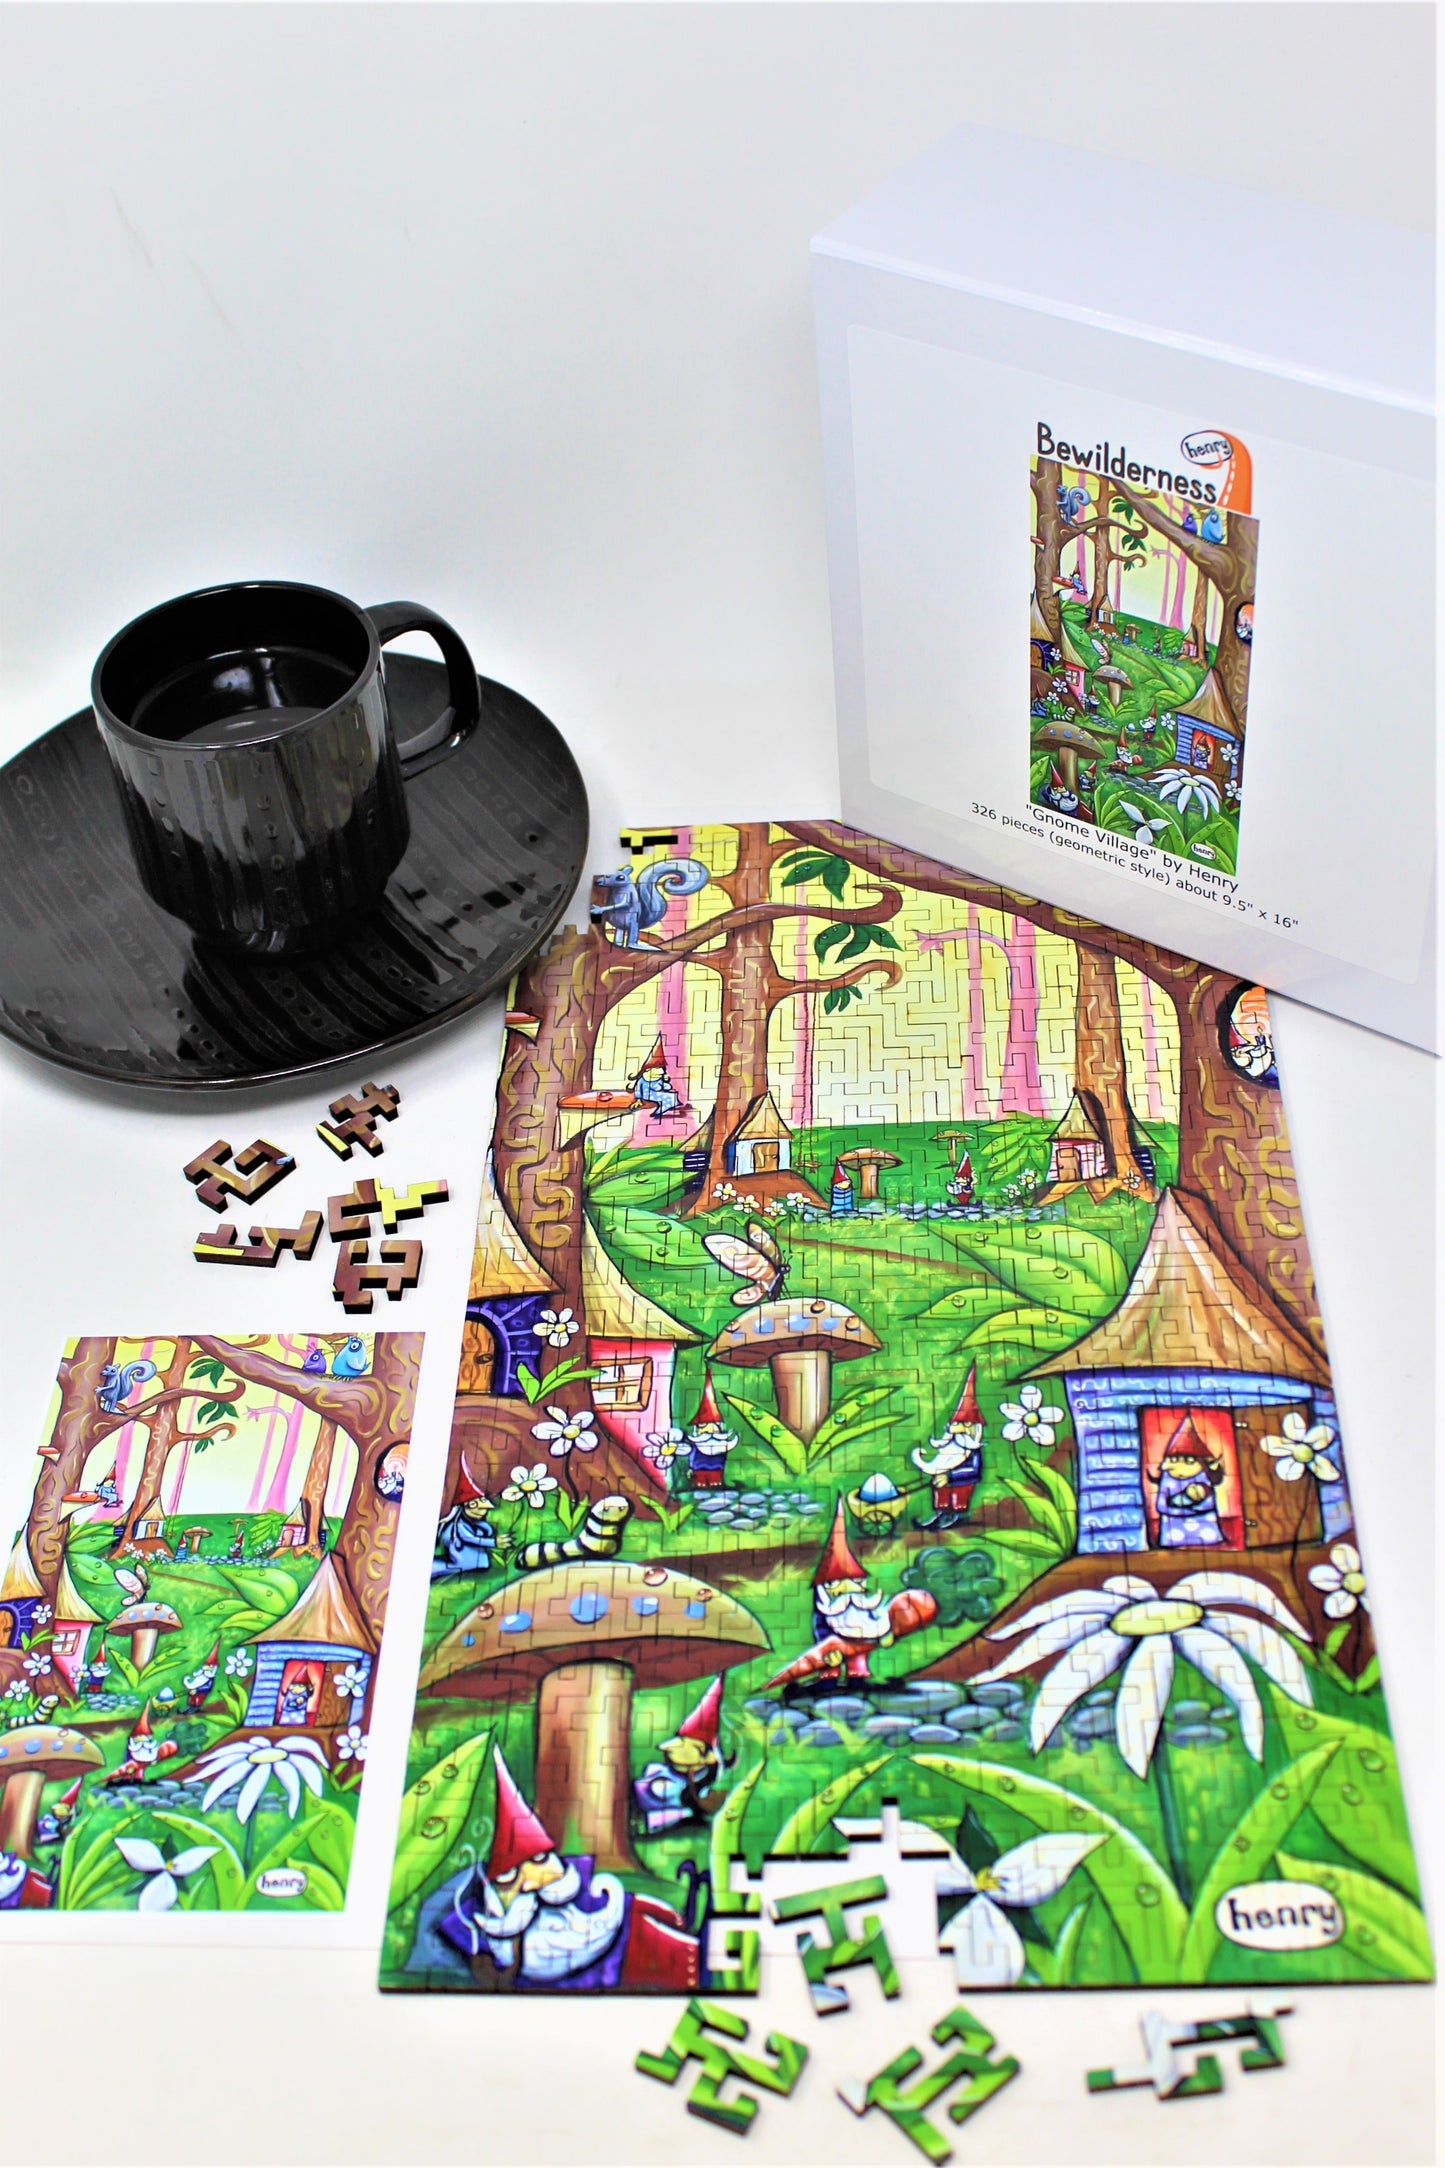 Gnome Village 326 Piece Geometric Puzzle Featuring the Art of Henry